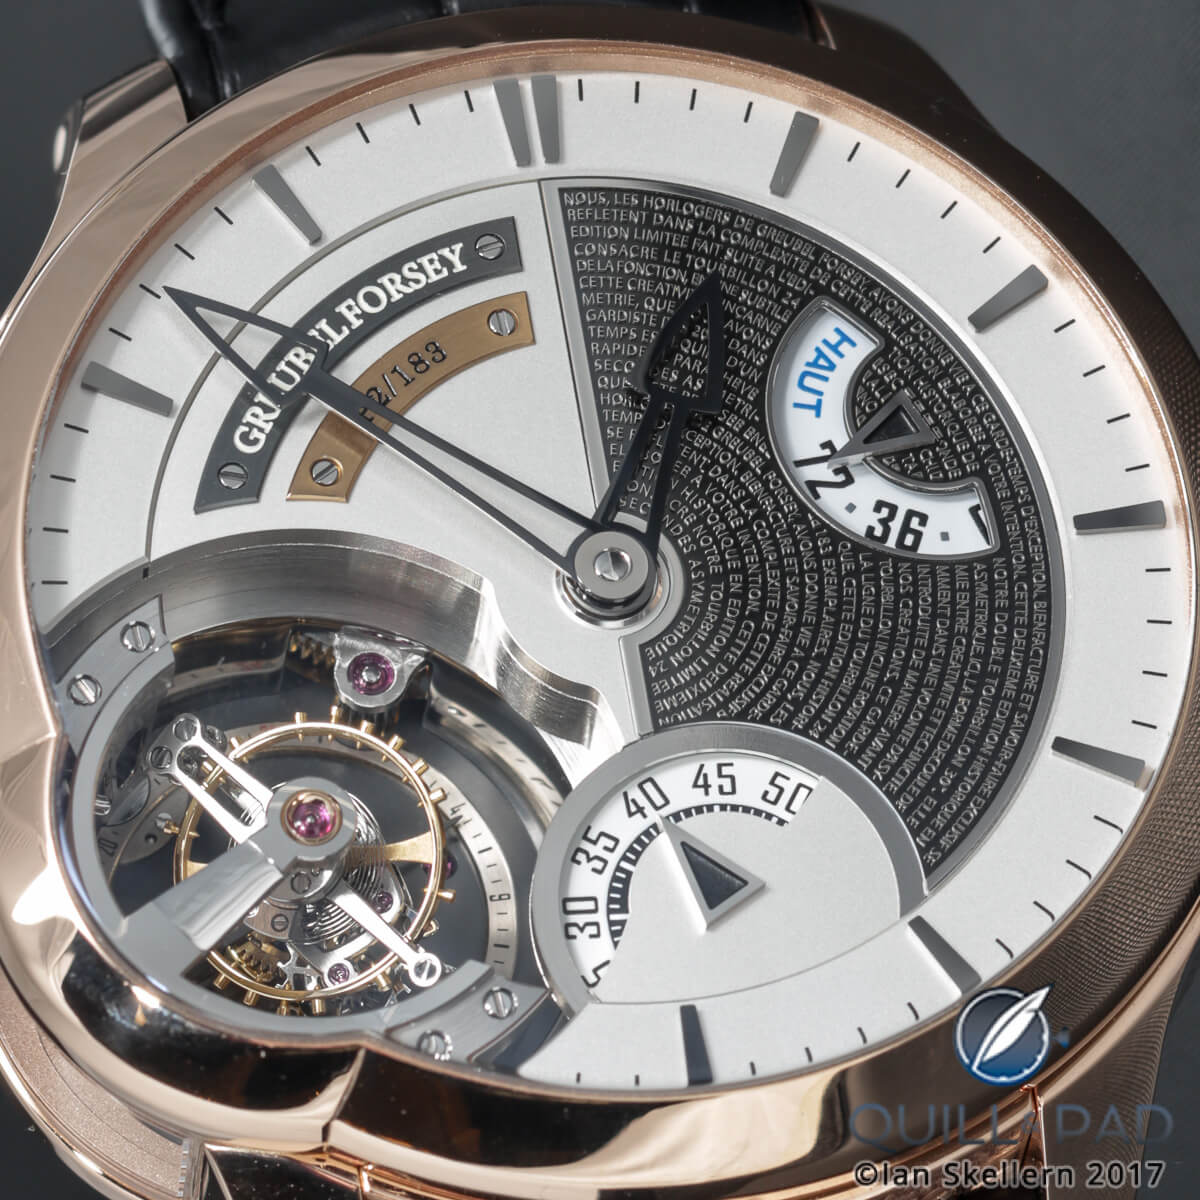 Close up look dial side of the Greubel Forsey Tourbillon 24 Secondes Edition Historique in red gold